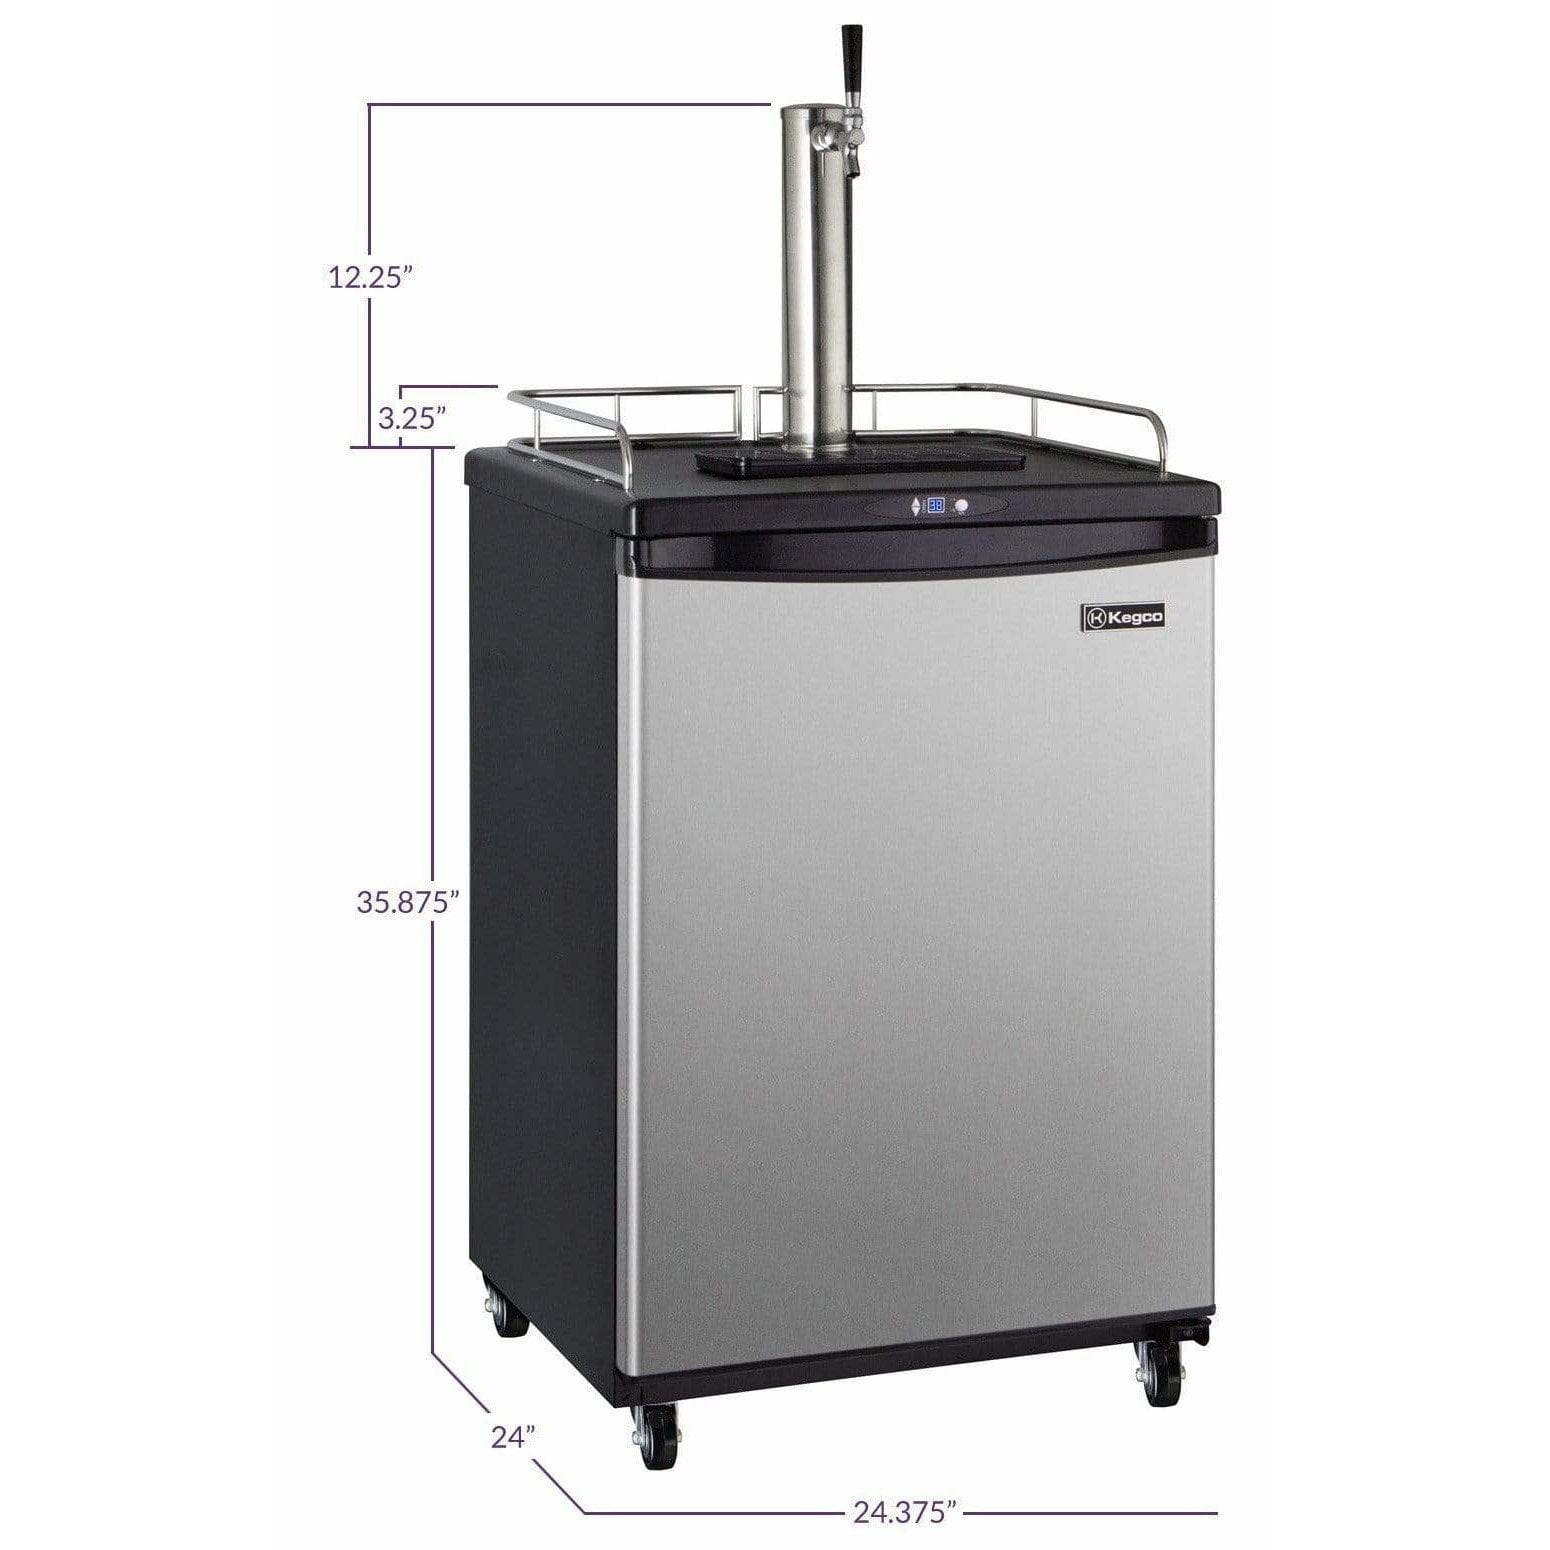 Kegco 24" Wide Single Tap Stainless Steel  Home Brew Kegerator HBK163S-1 Wine Coolers Empire